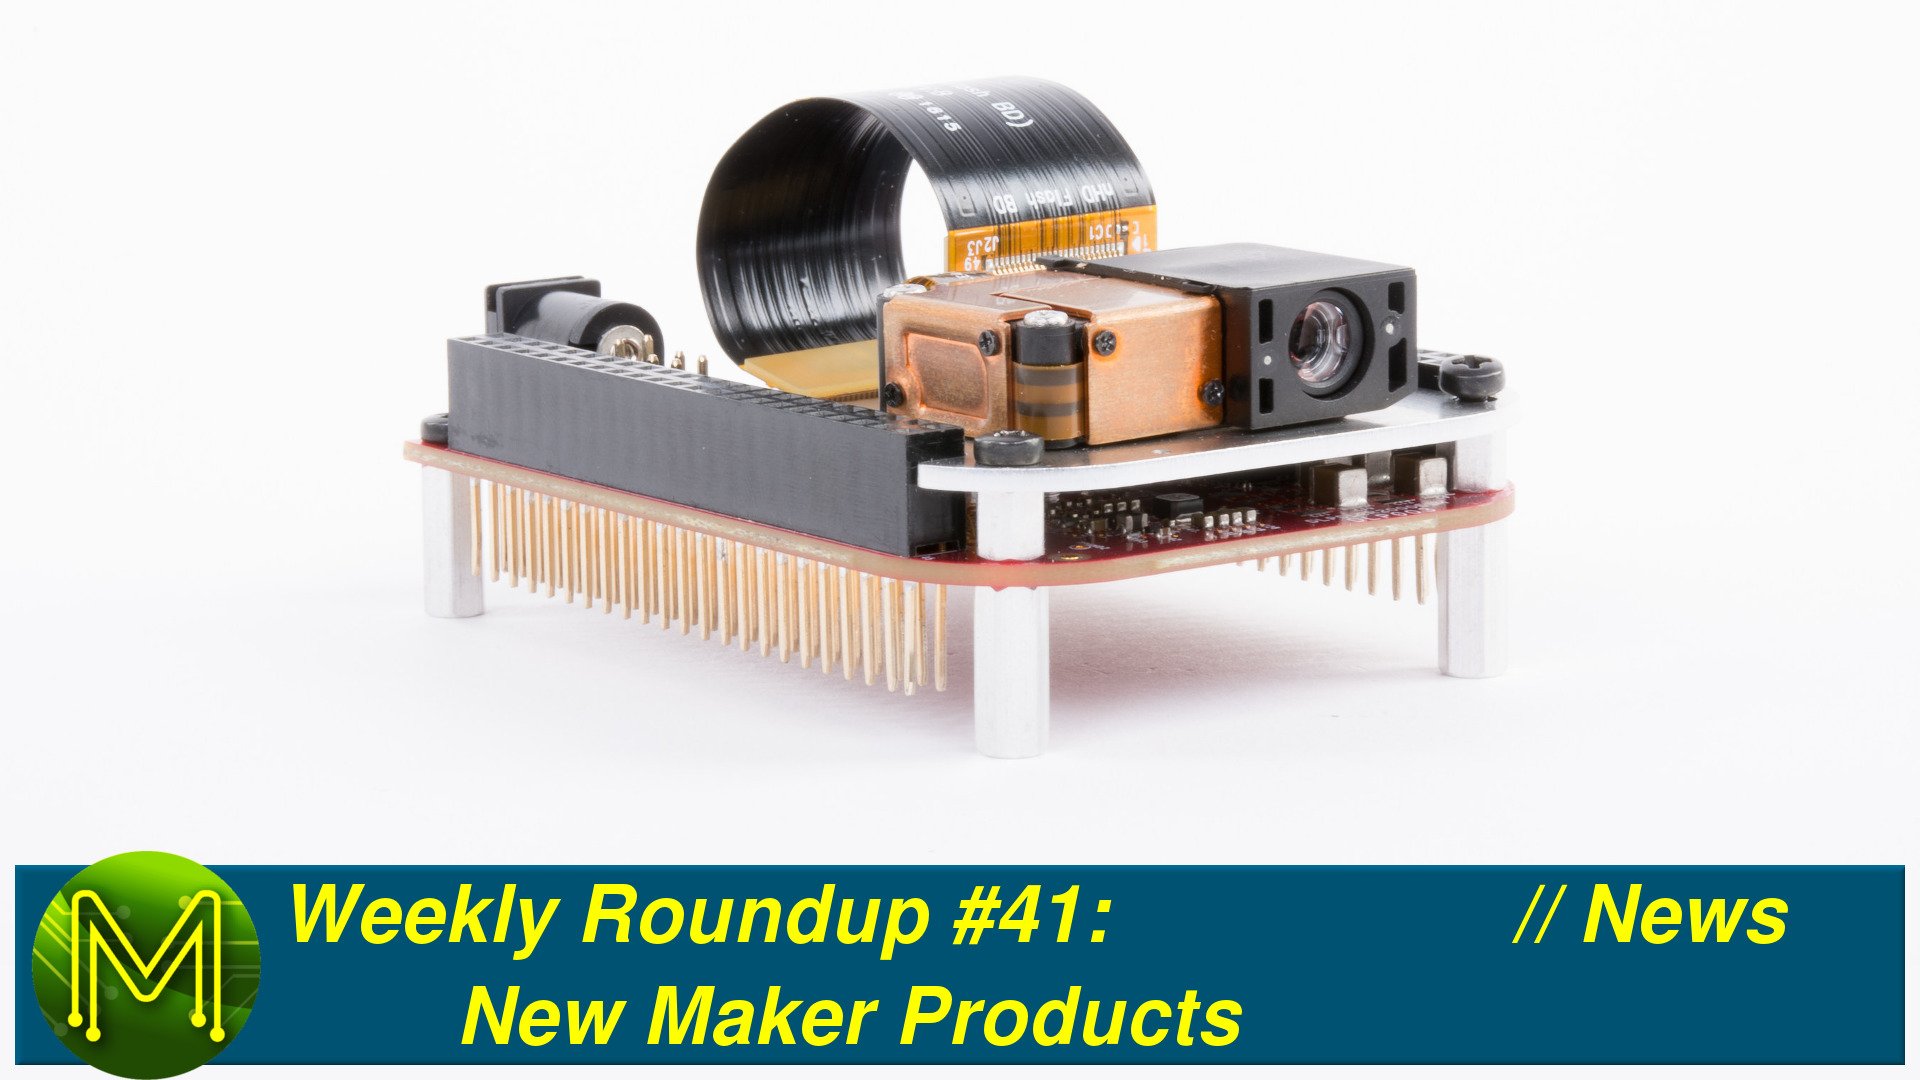 Weekly Roundup #41 - New Maker Products // News